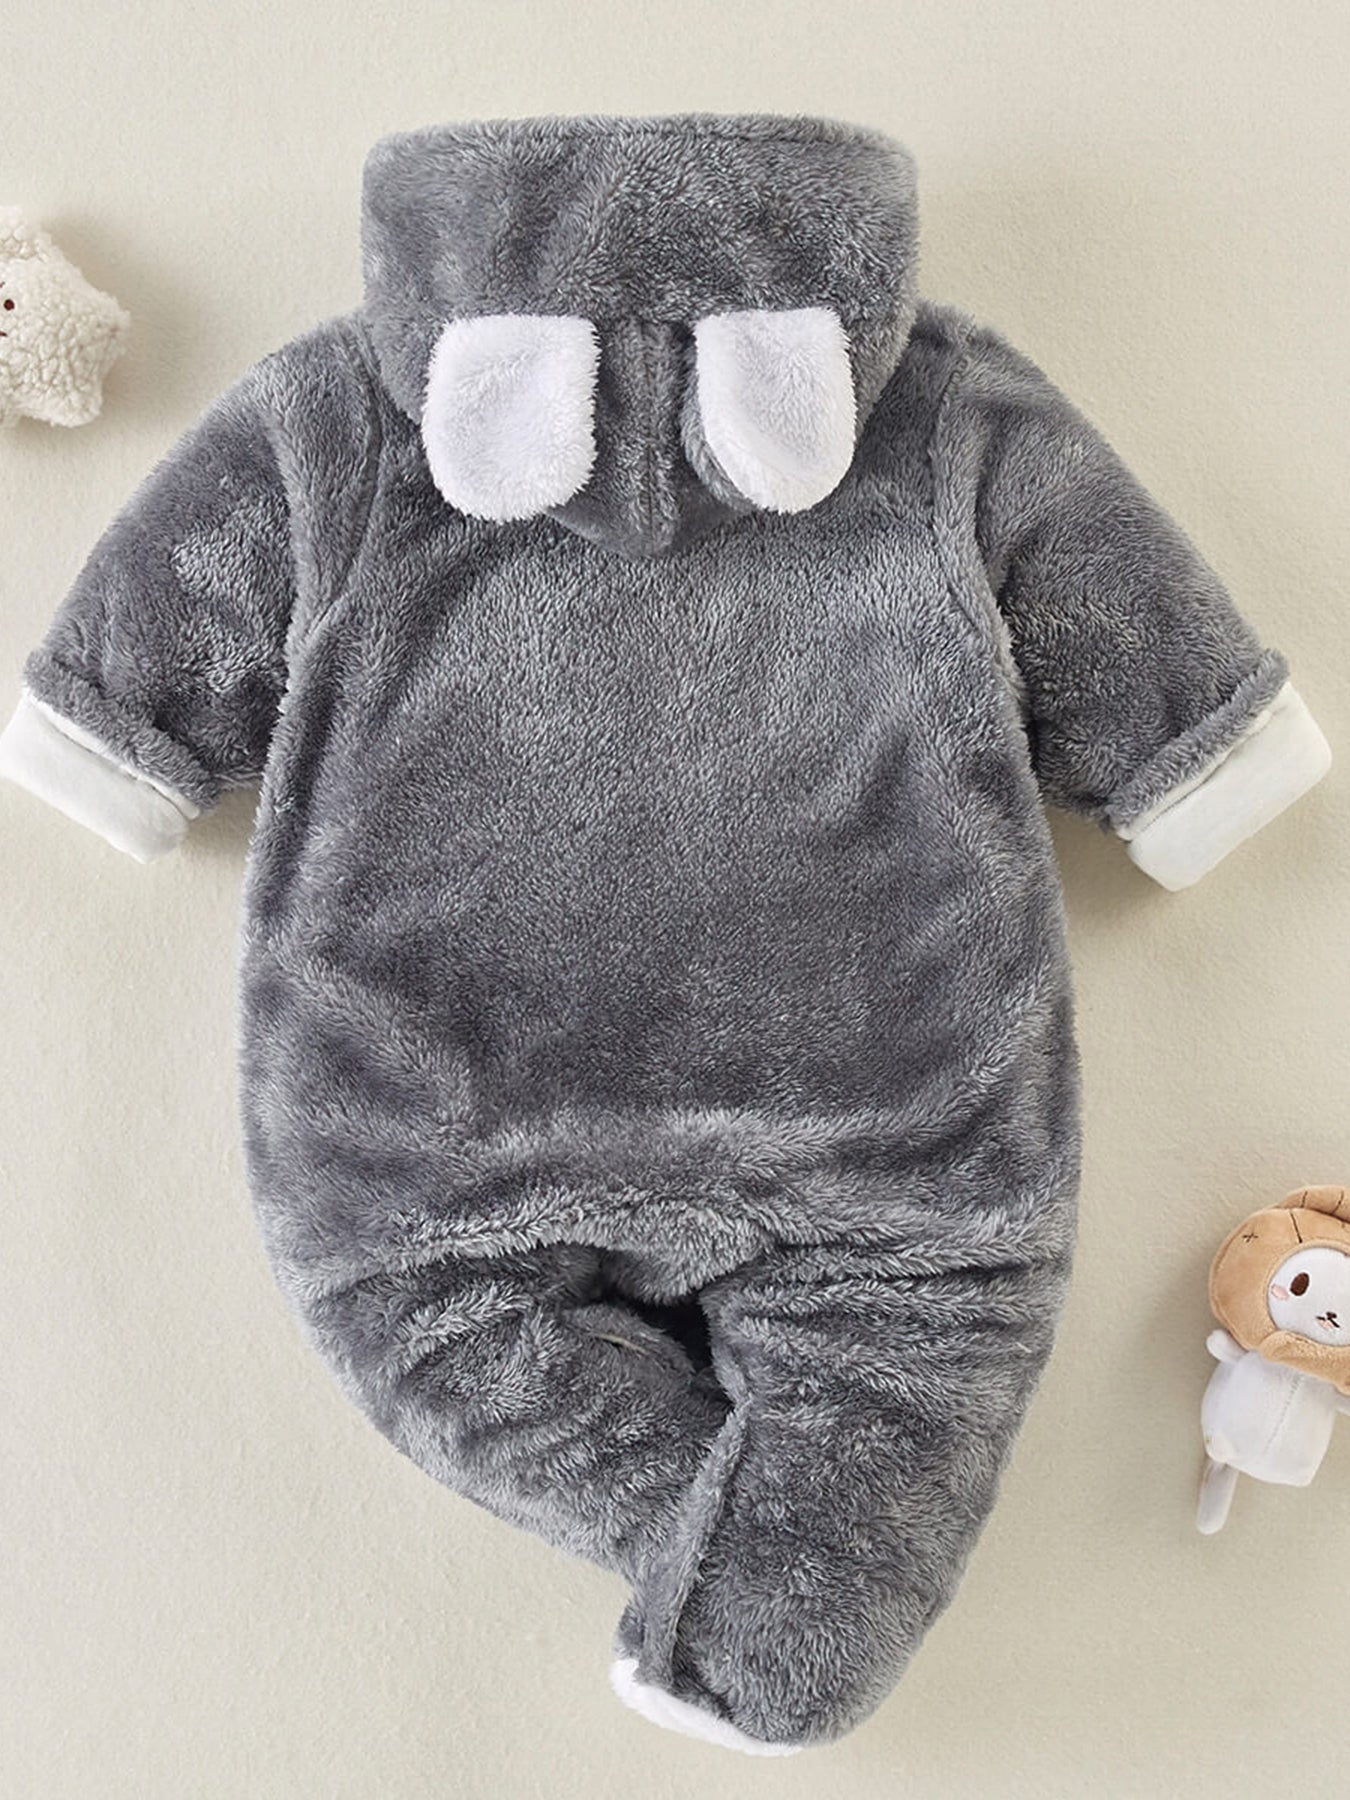 Baby Plush Long Sleeve Faux Fur Jumpsuit With Bear Ears Design For Fall Winter New